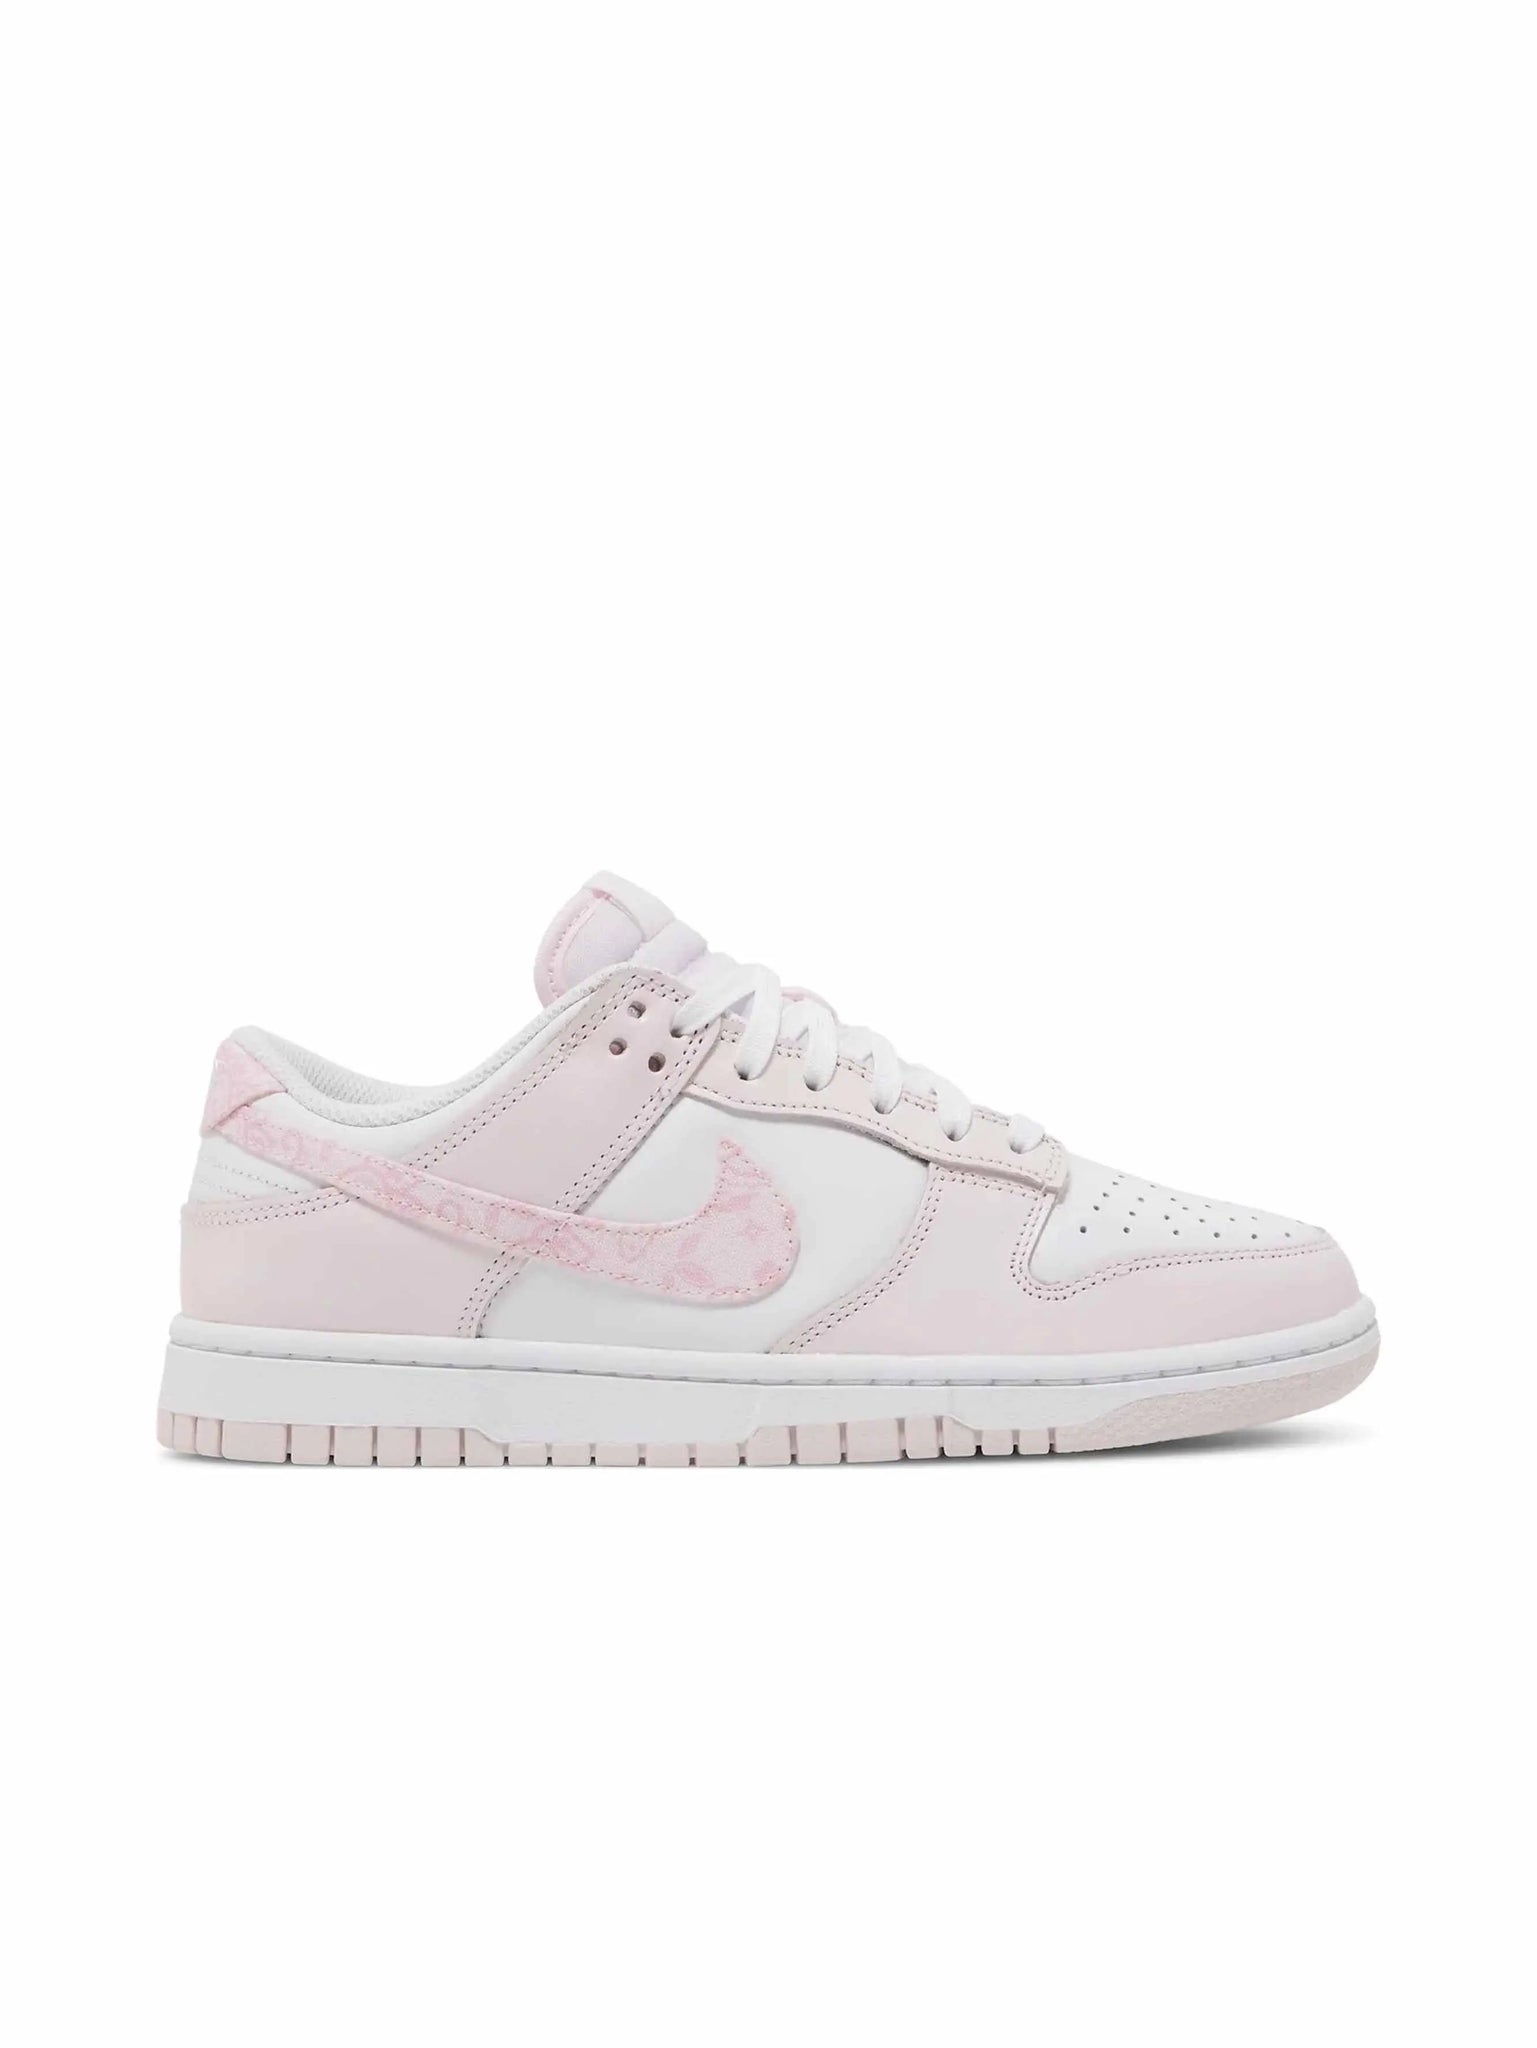 Nike Dunk Low Essential Paisley Pack Pink (W) - Prior